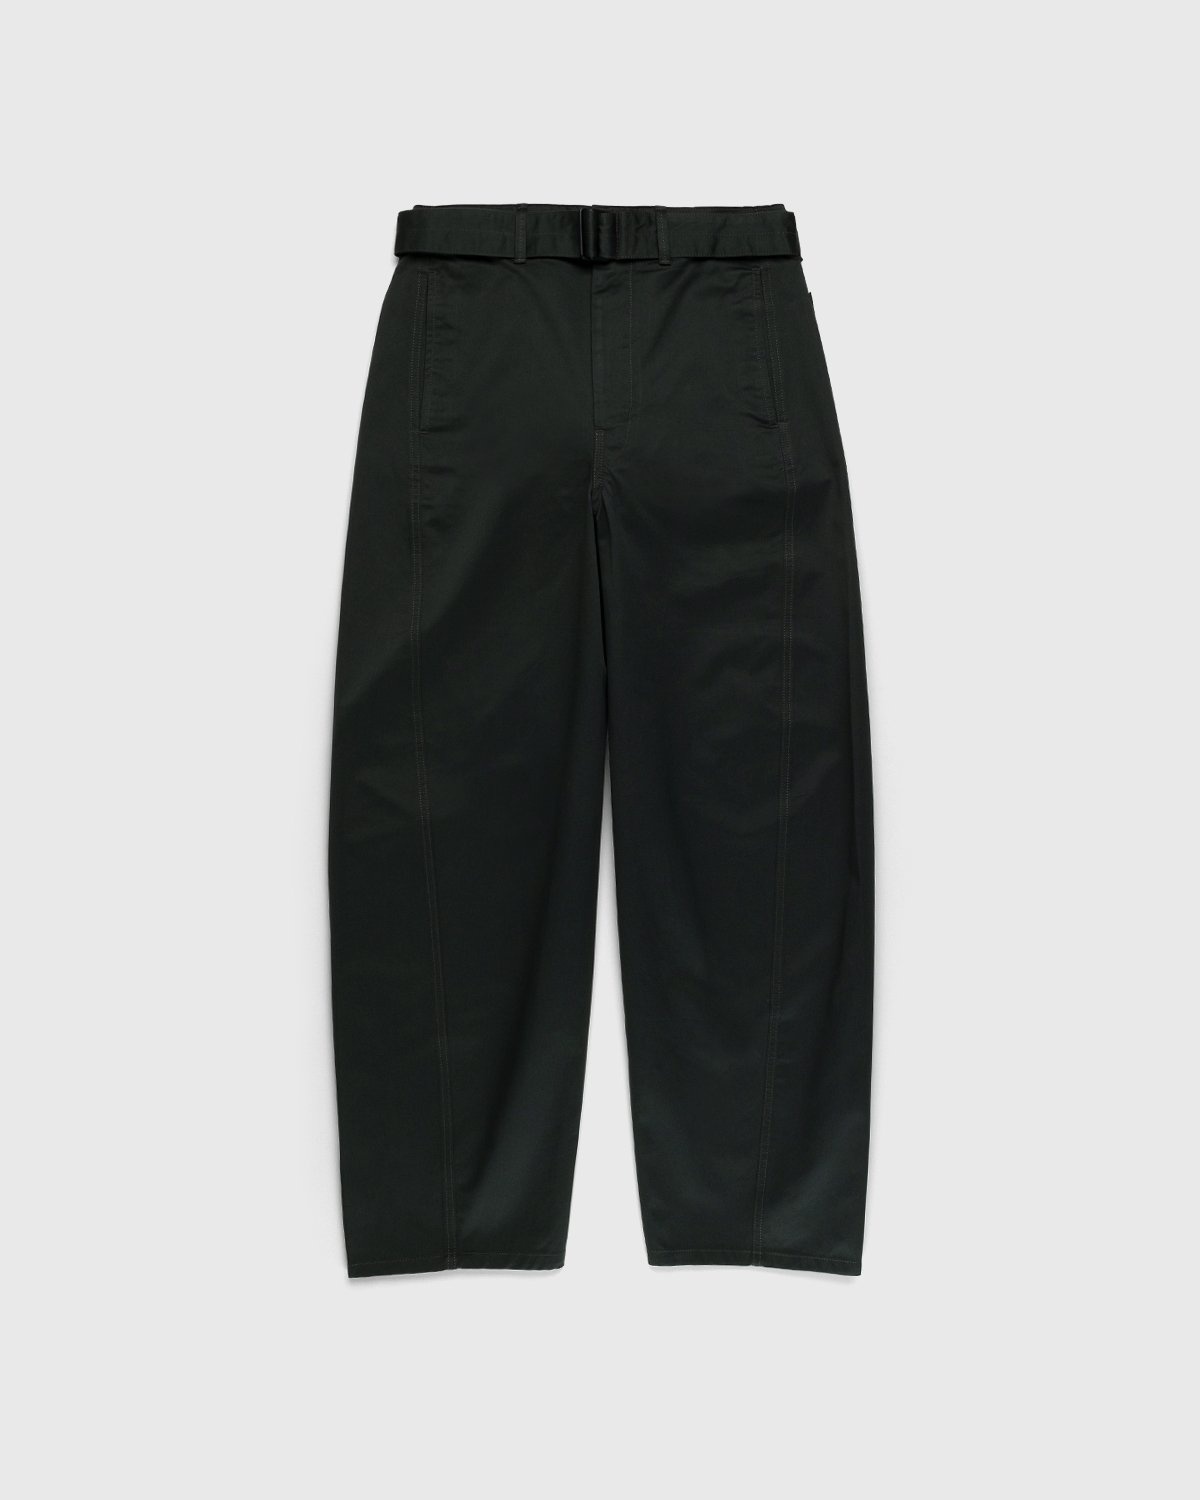 Lemaire – Twisted Belted Pants Dark Slate Green - Pants - Grey - Image 1